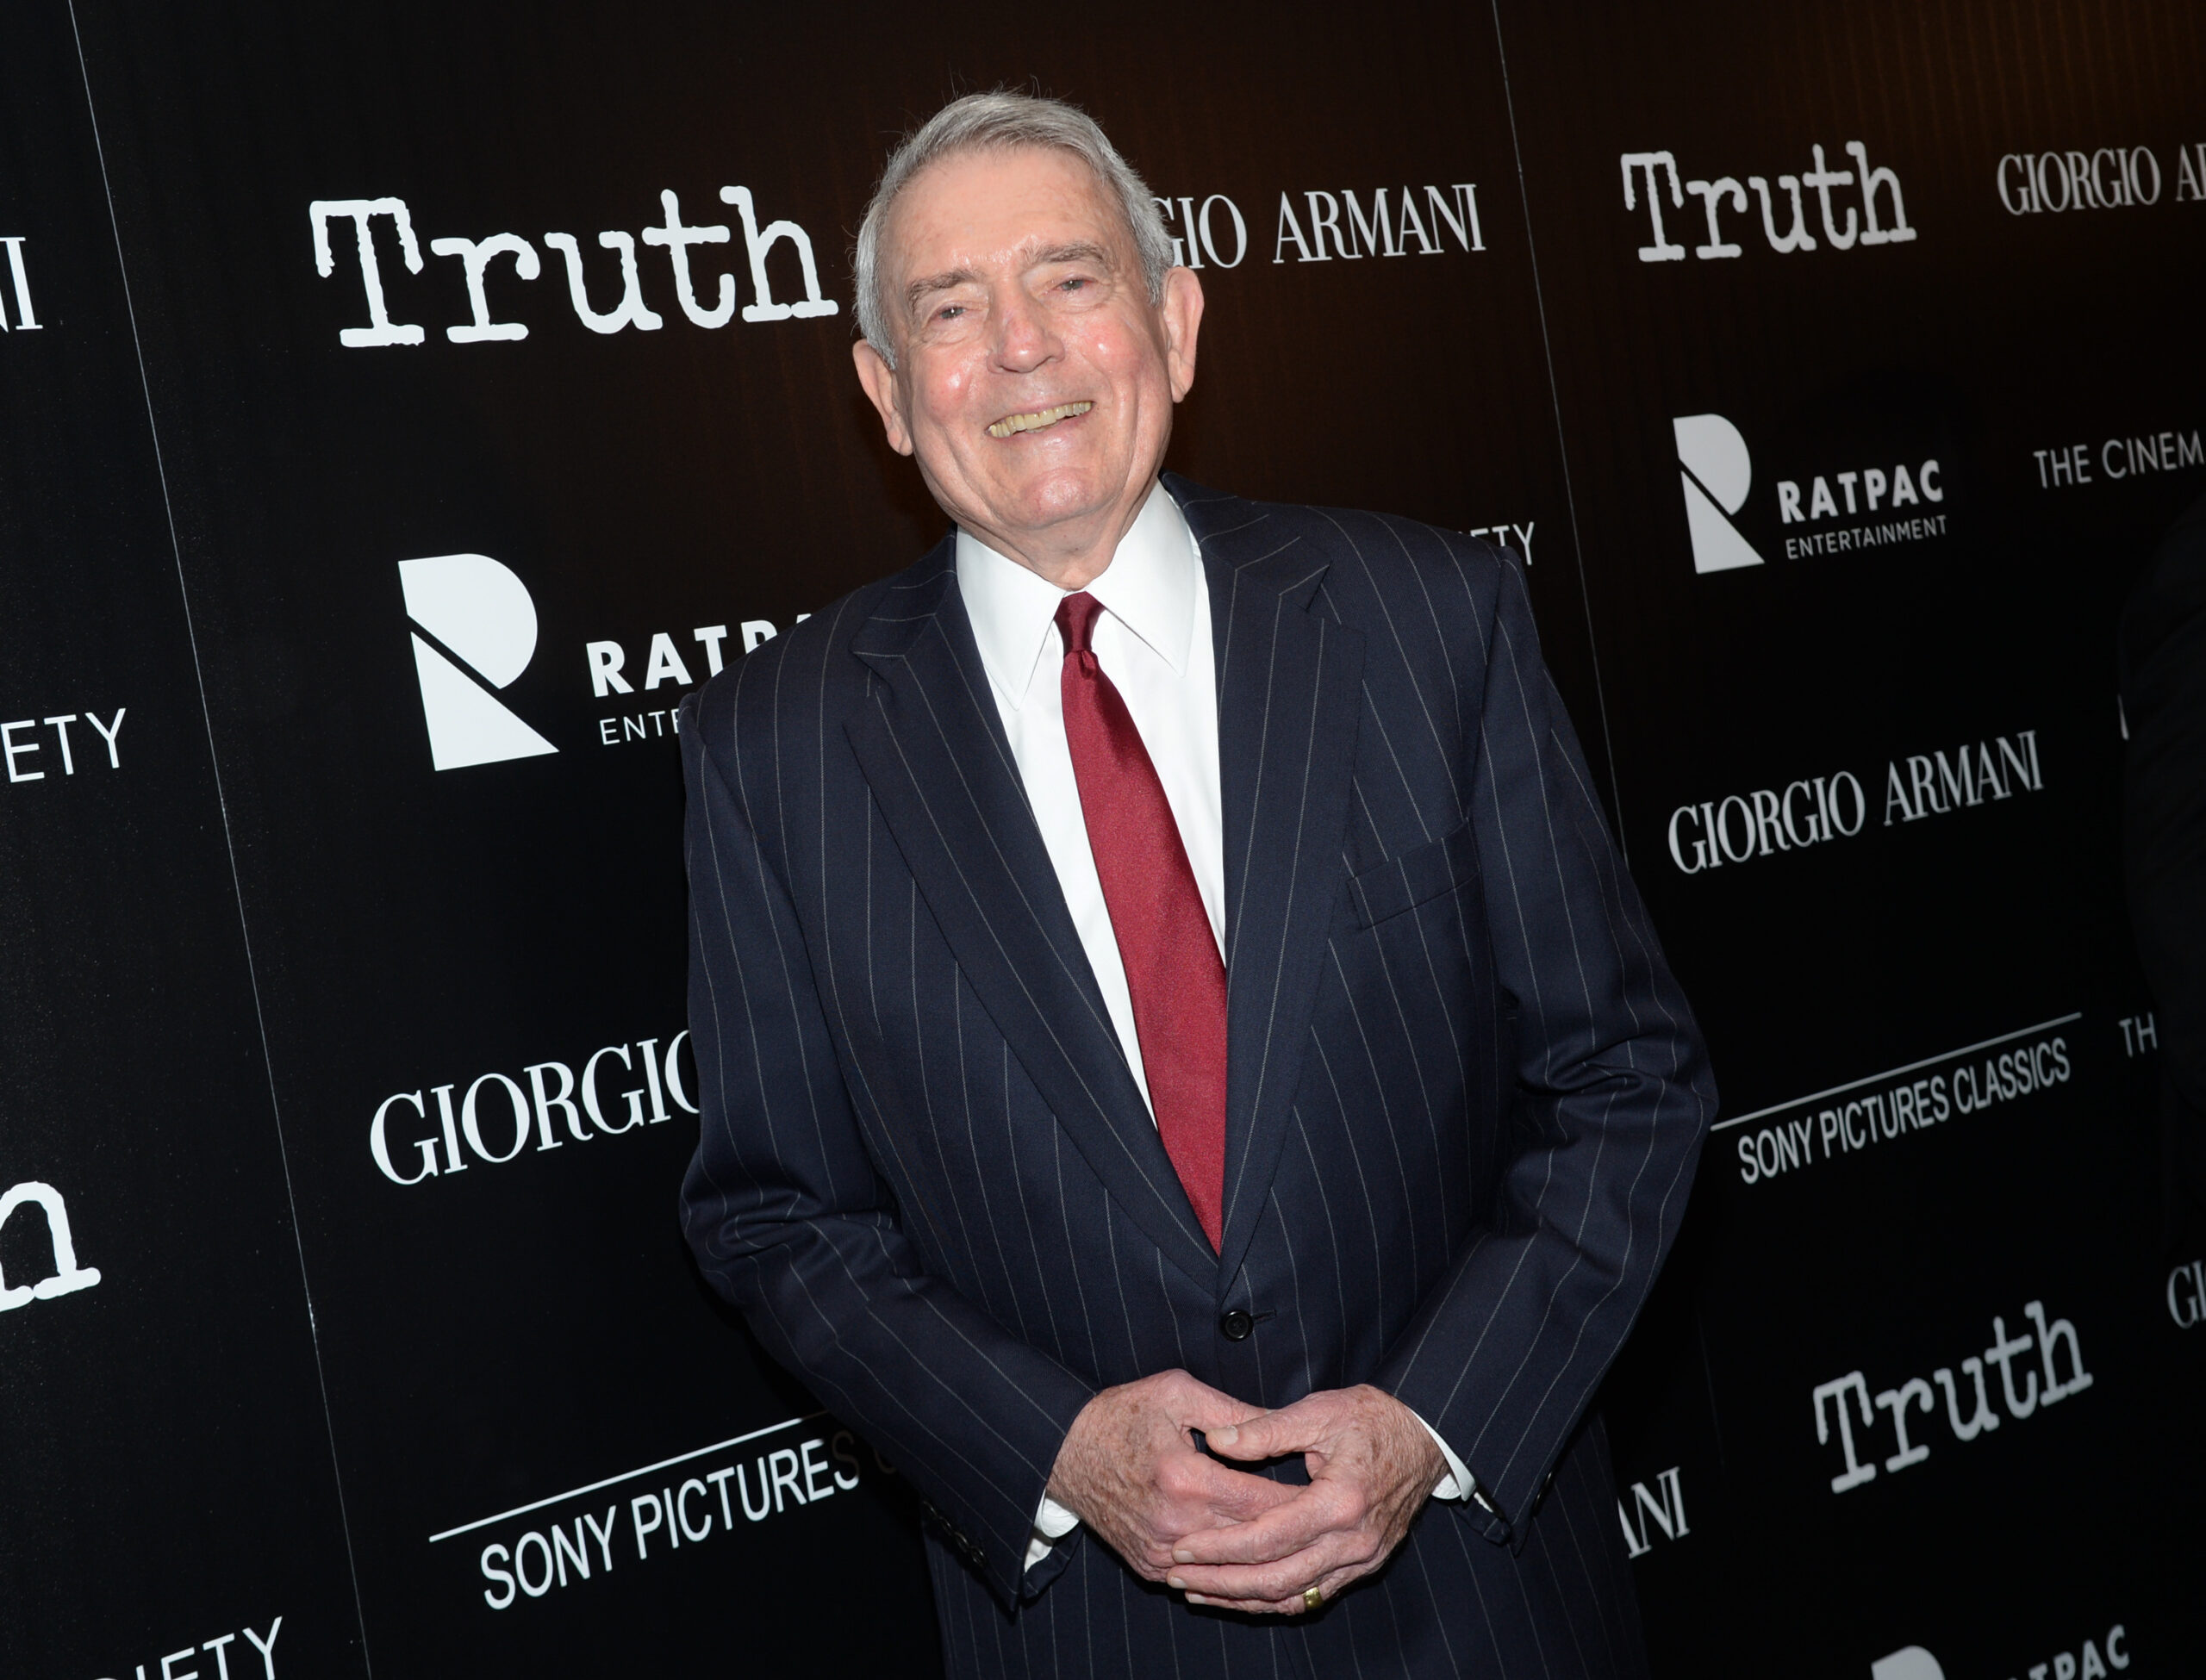 Television journalist Dan Rather attends a special screening of "Truth" at The Museum of Modern Art